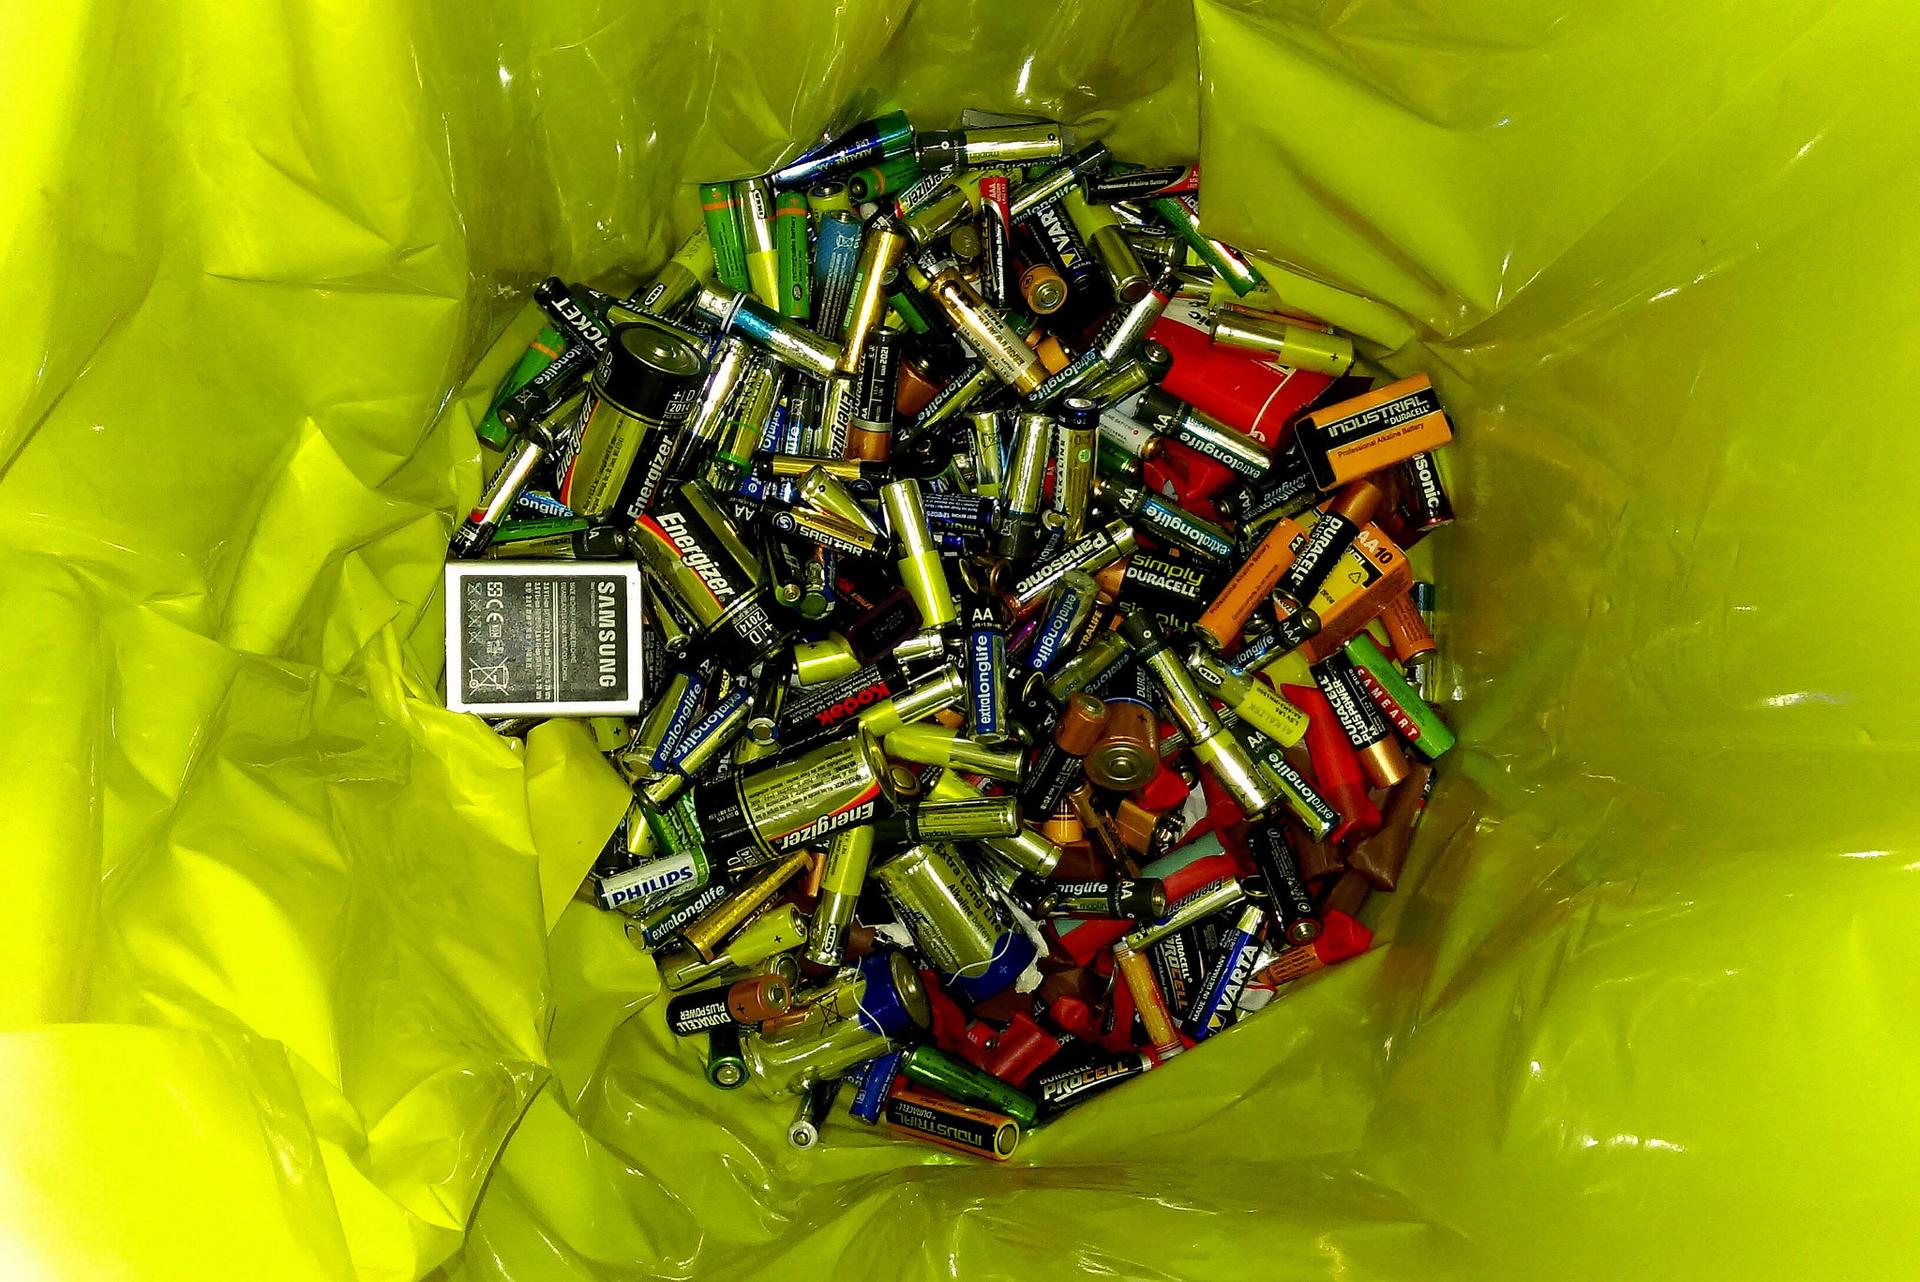 A glorious pile of batteries.